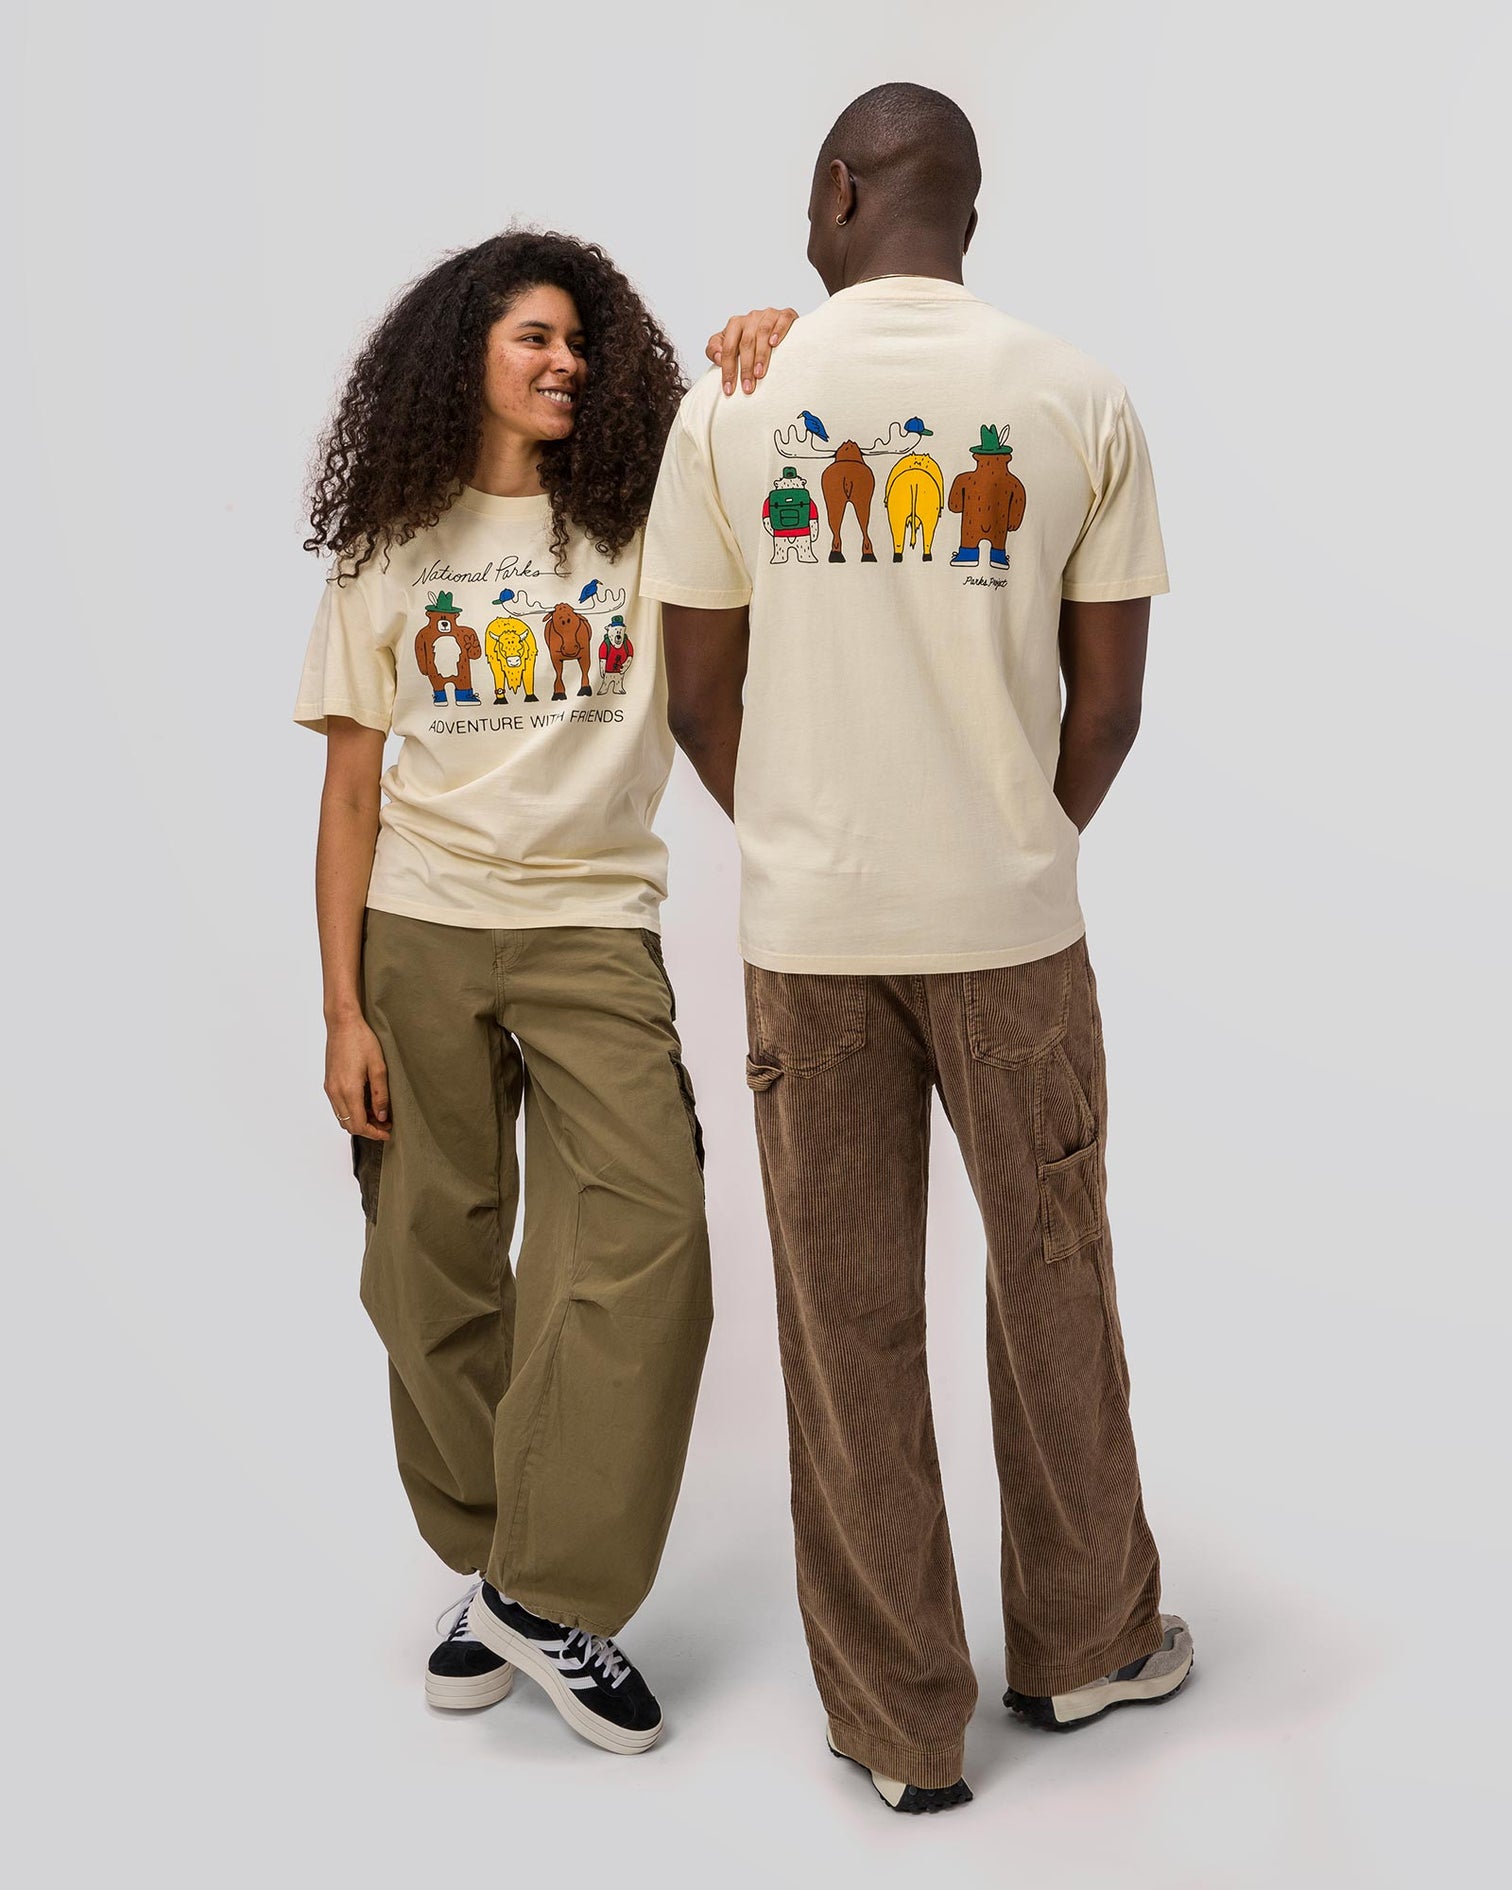 Shop Adventure With Friends Tee Inspired by our National Parks – Parks ...